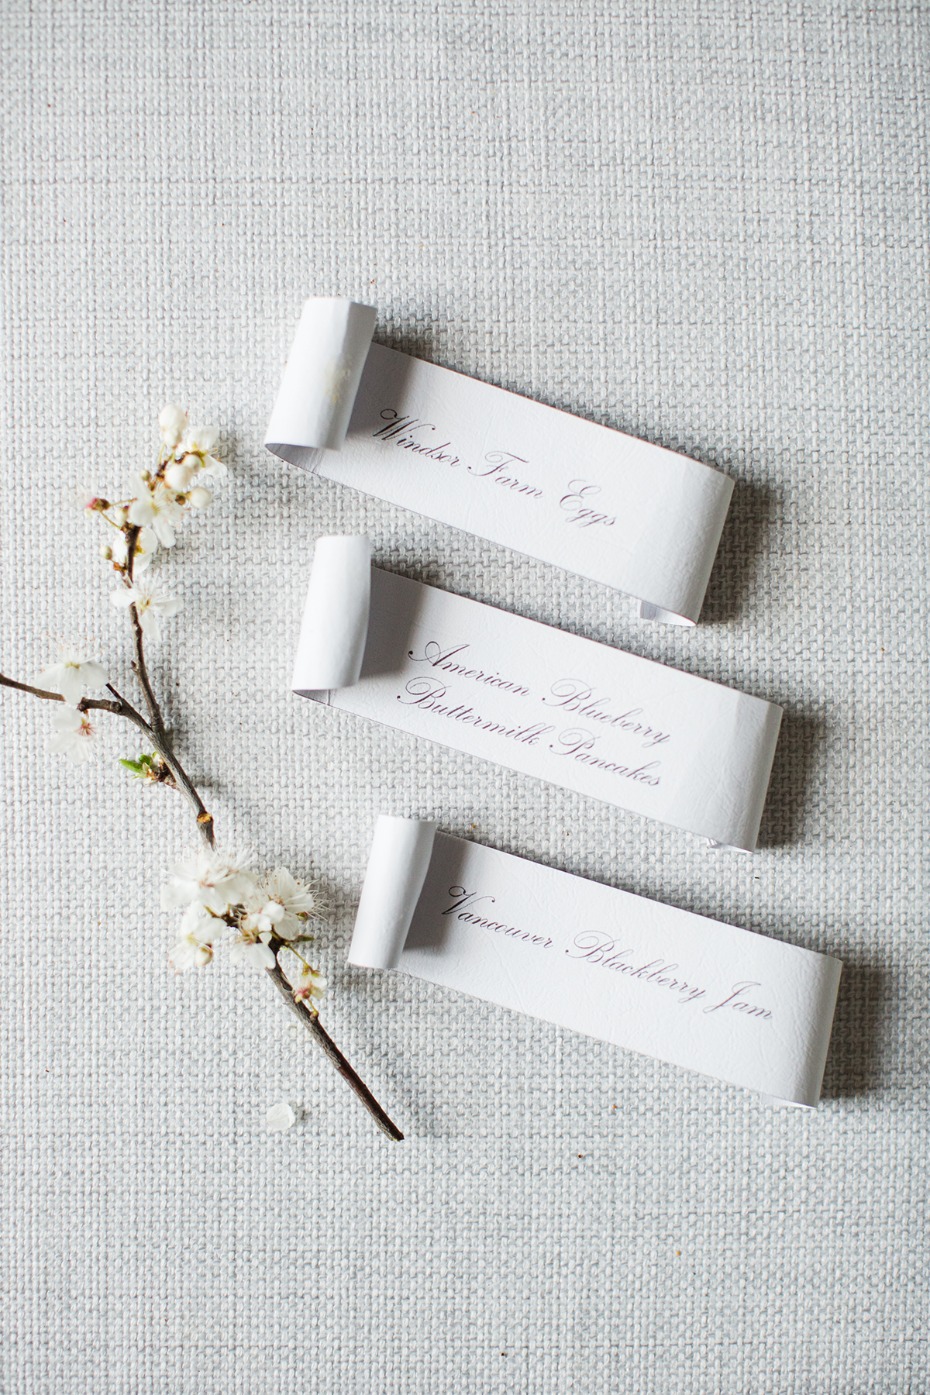 scroll place cards